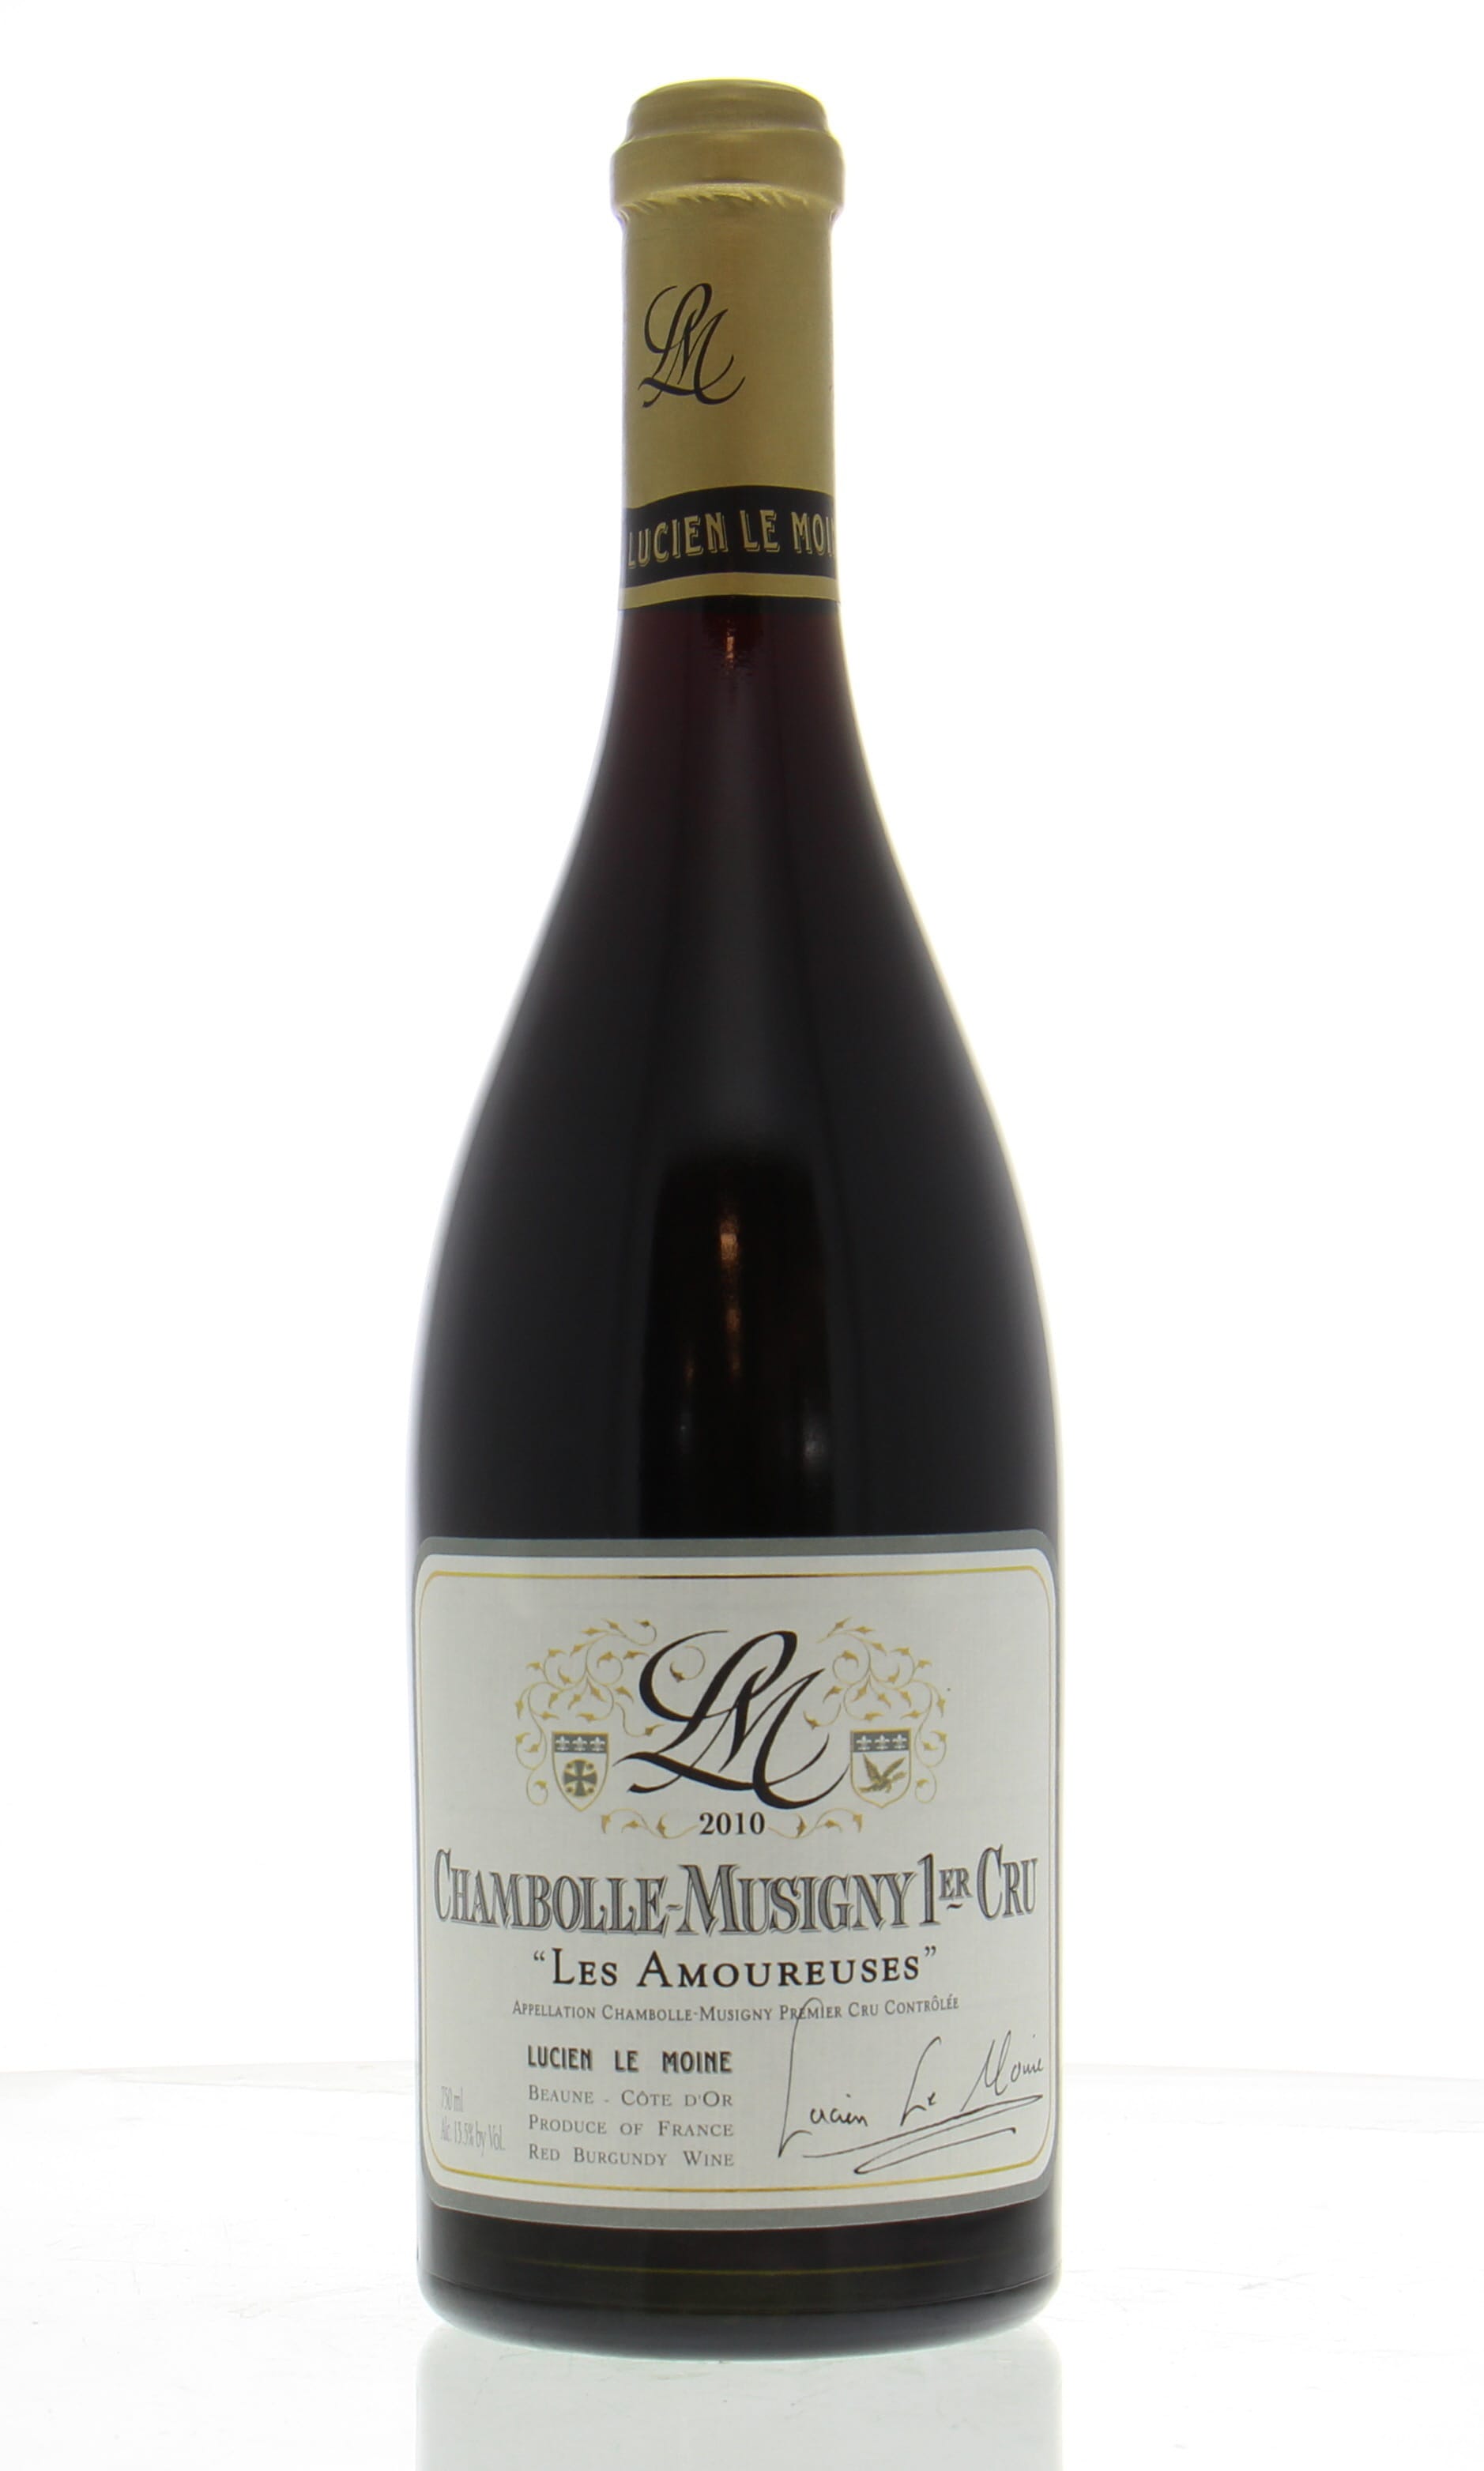 Lucien Le Moine - Chambolle Musigny les Amoureuses 2010